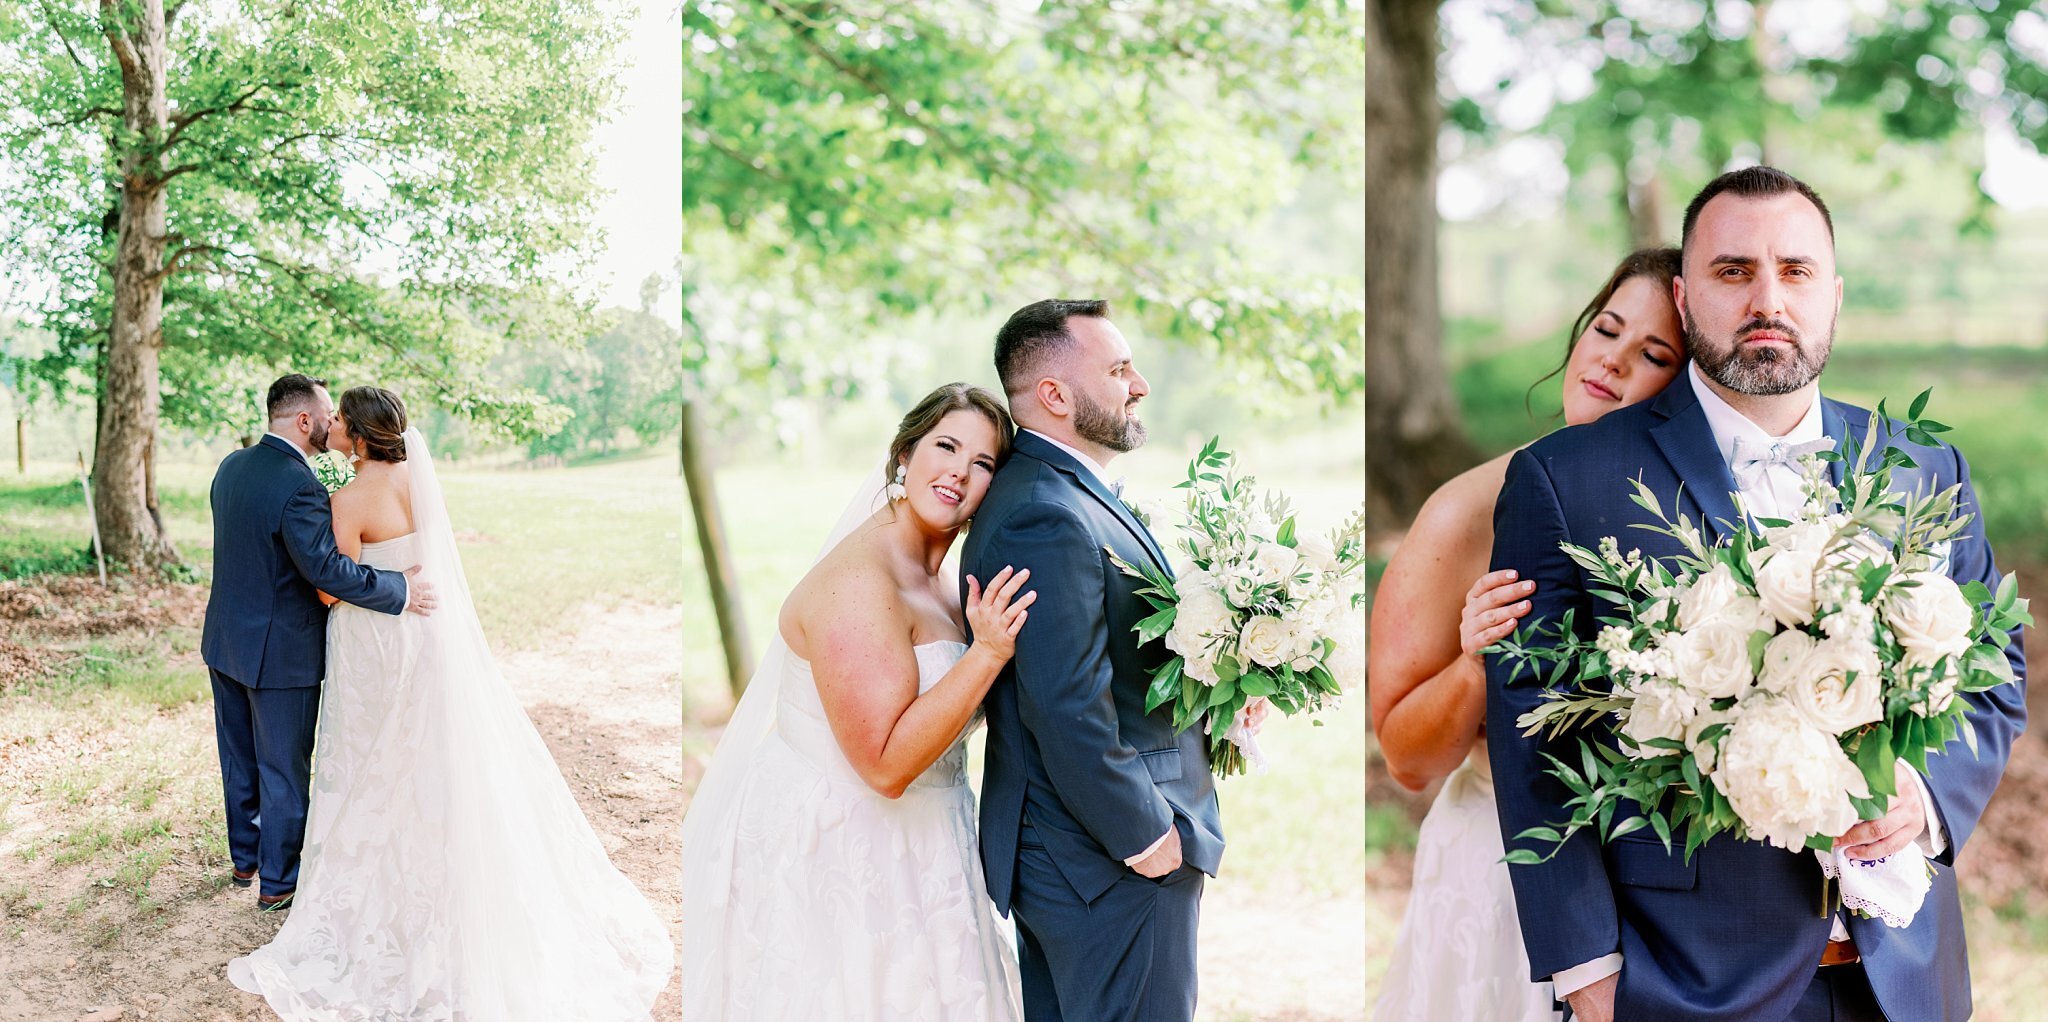 bright and colorful wedding photographers near Greenville, SC